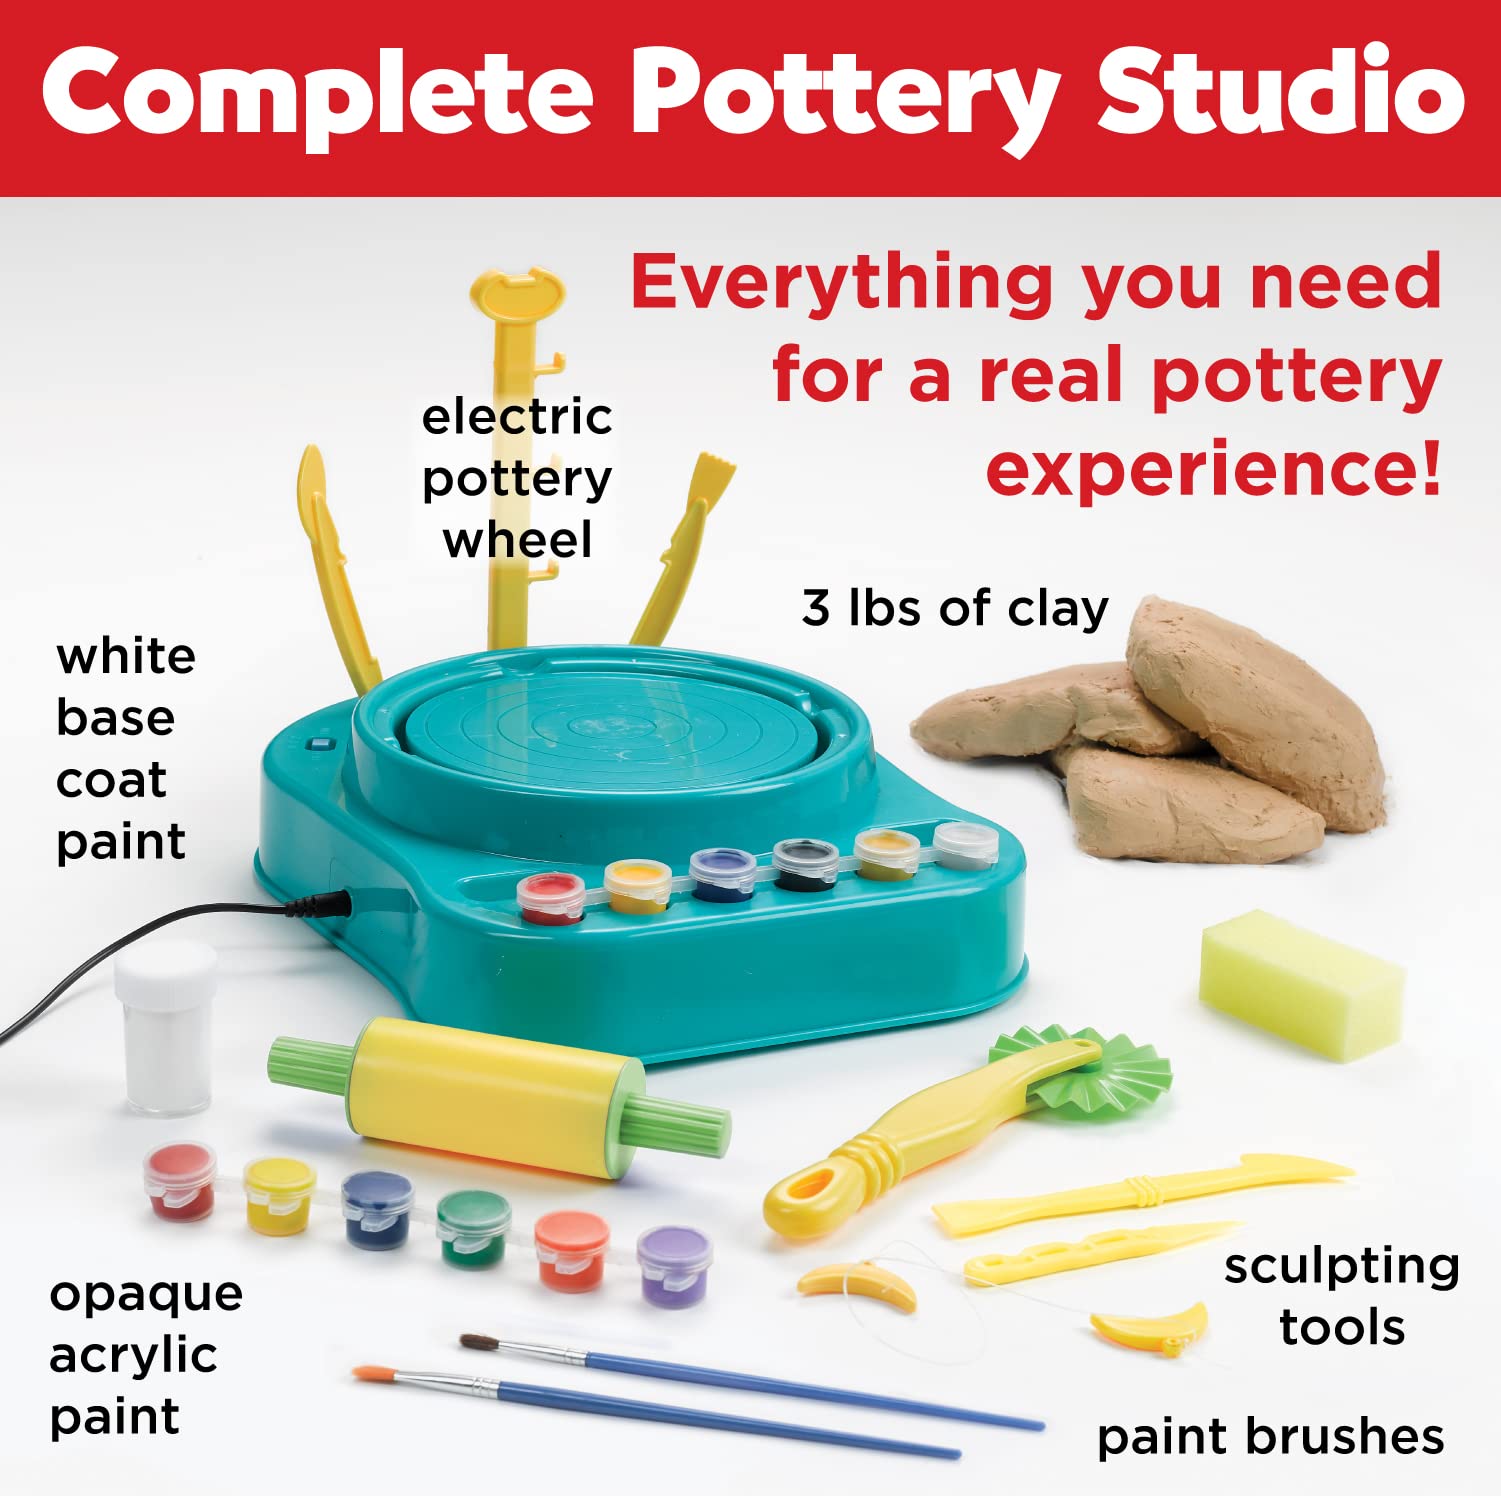 Faber-Castell Pottery Studio - Kids Pottery Wheel Kit for Ages 8+, Complete Pottery Wheel and Painting Kit for Beginners, 3 lbs of Sculpting Clay and Tools, Blue